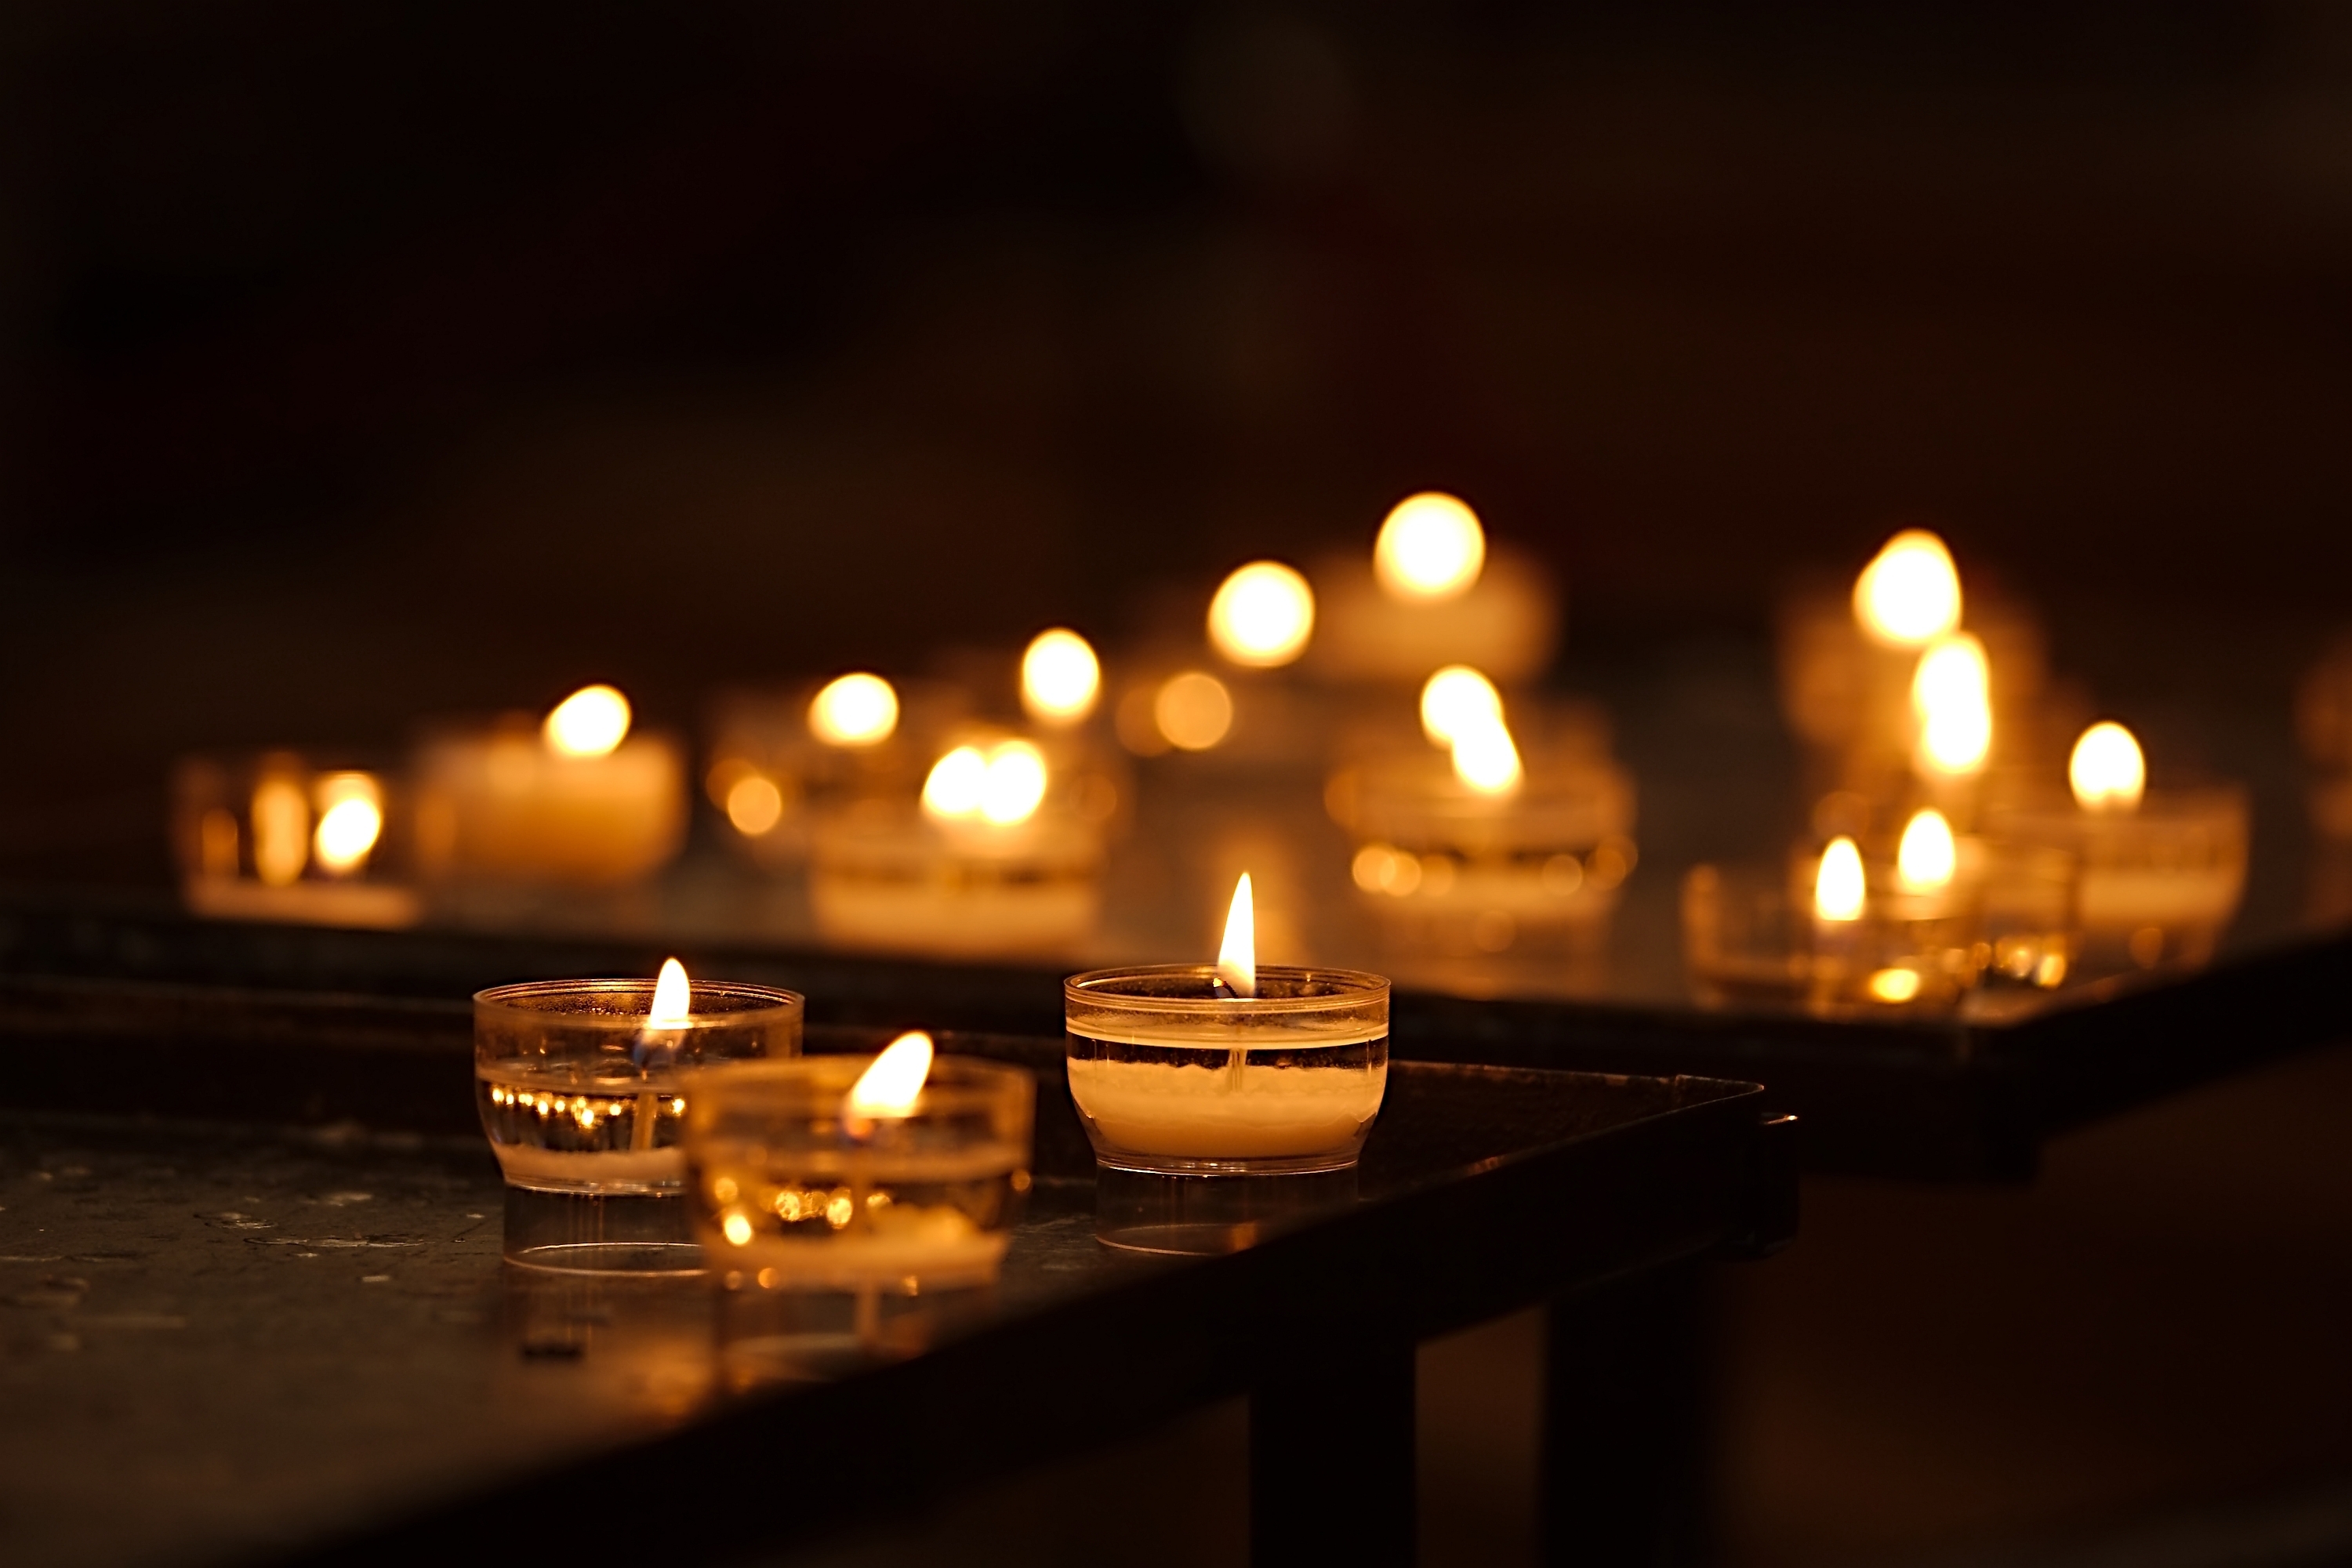 Burning candles | Source: Shutterstock